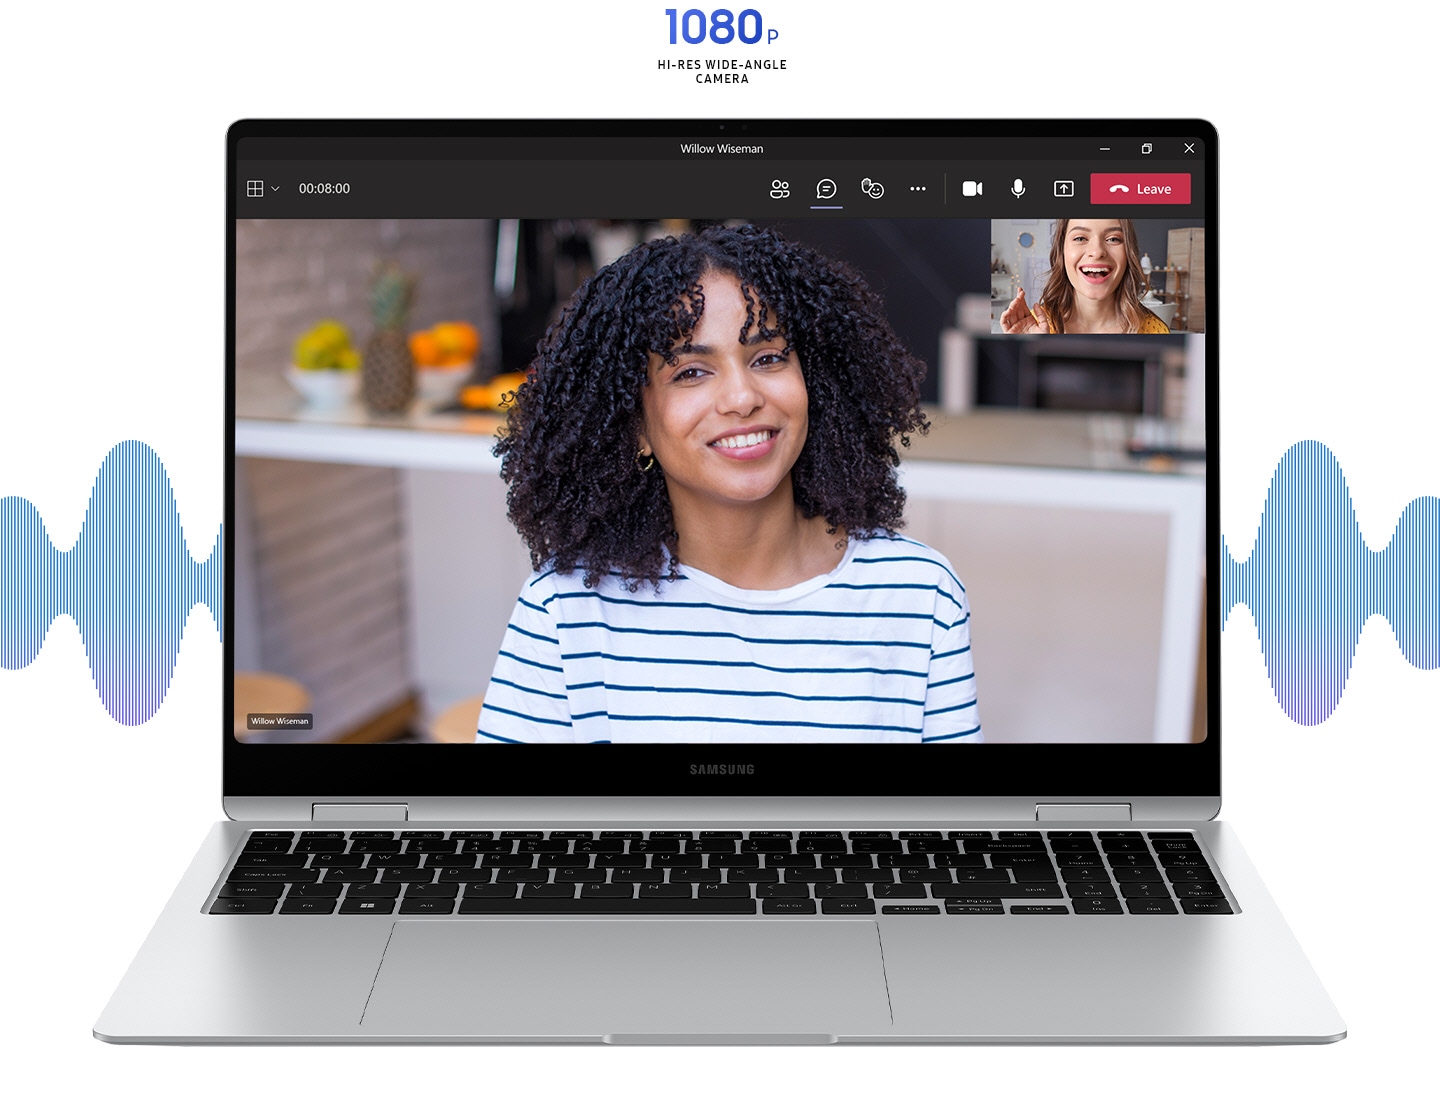 Front view of Galaxy Book4 Pro 360 in Platinum Silver, open and facing forward with Microsoft Teams app open in full screen and two people shown in a video call. 1080p HI-RES WIDE-ANGLE CAMERA.